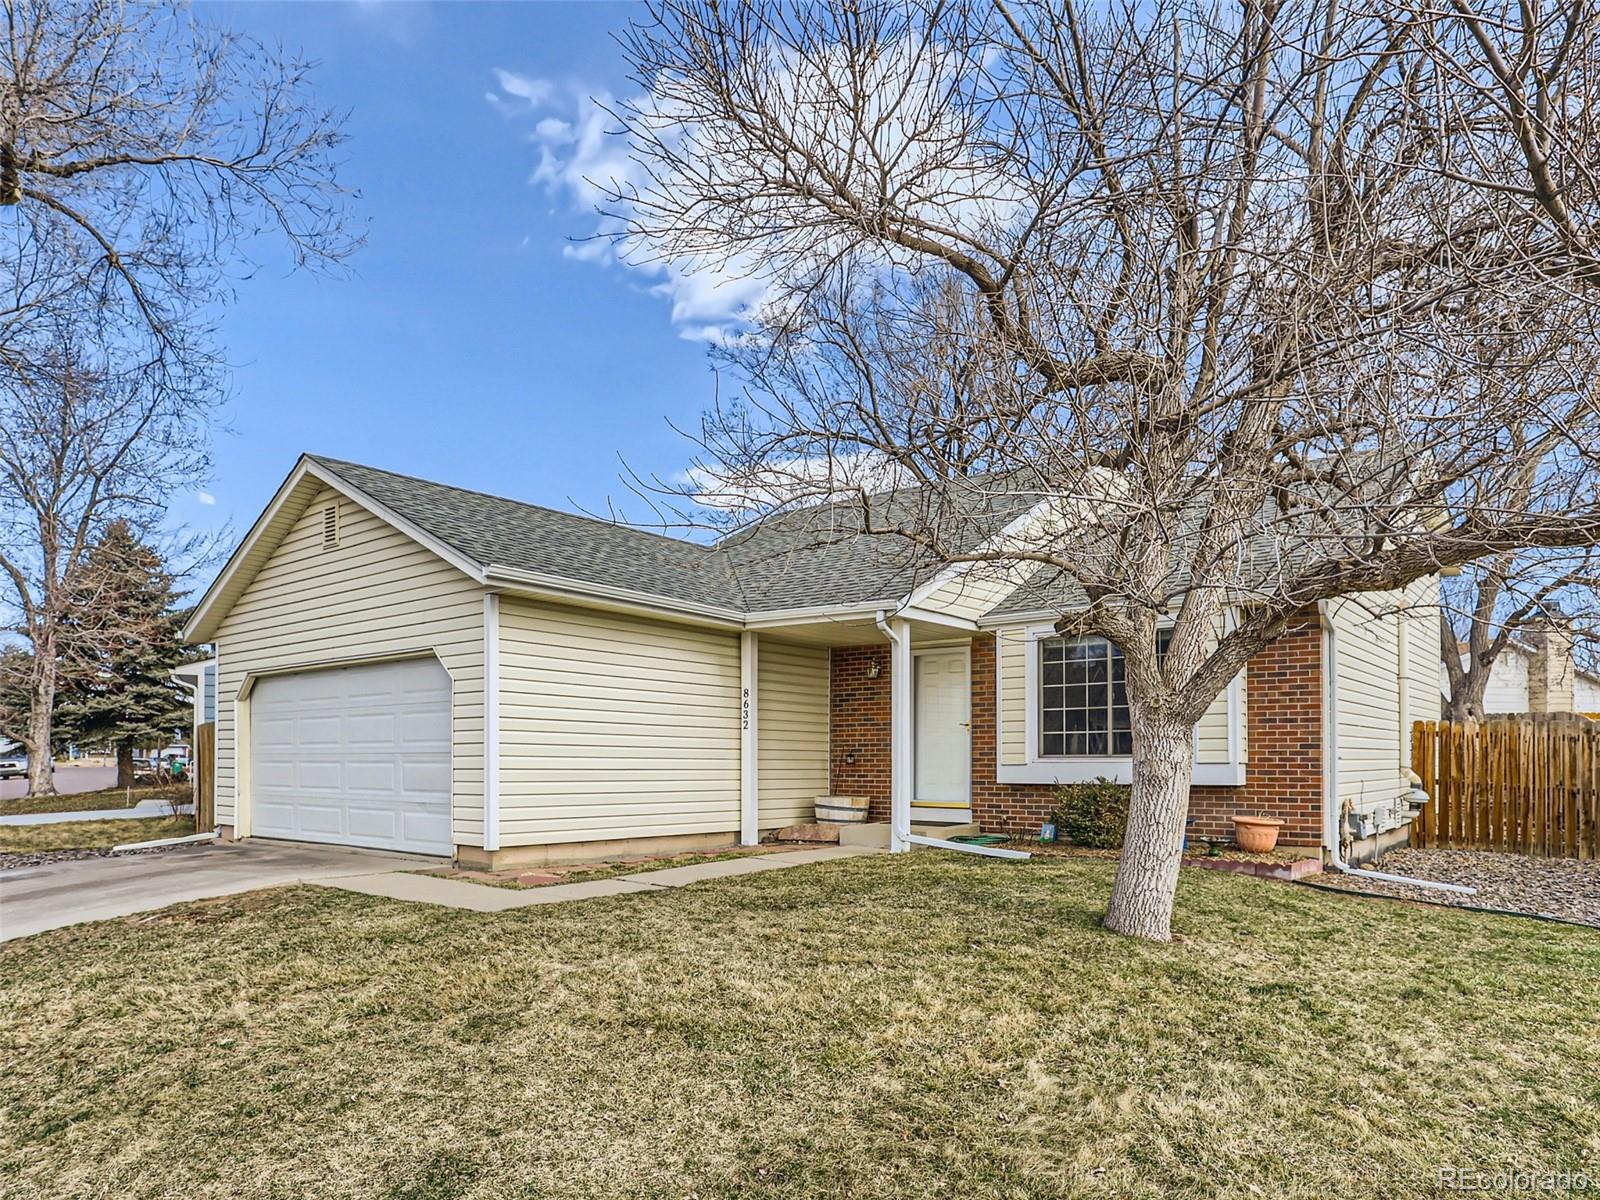 Report Image for 8632 W Star Circle,Littleton, Colorado